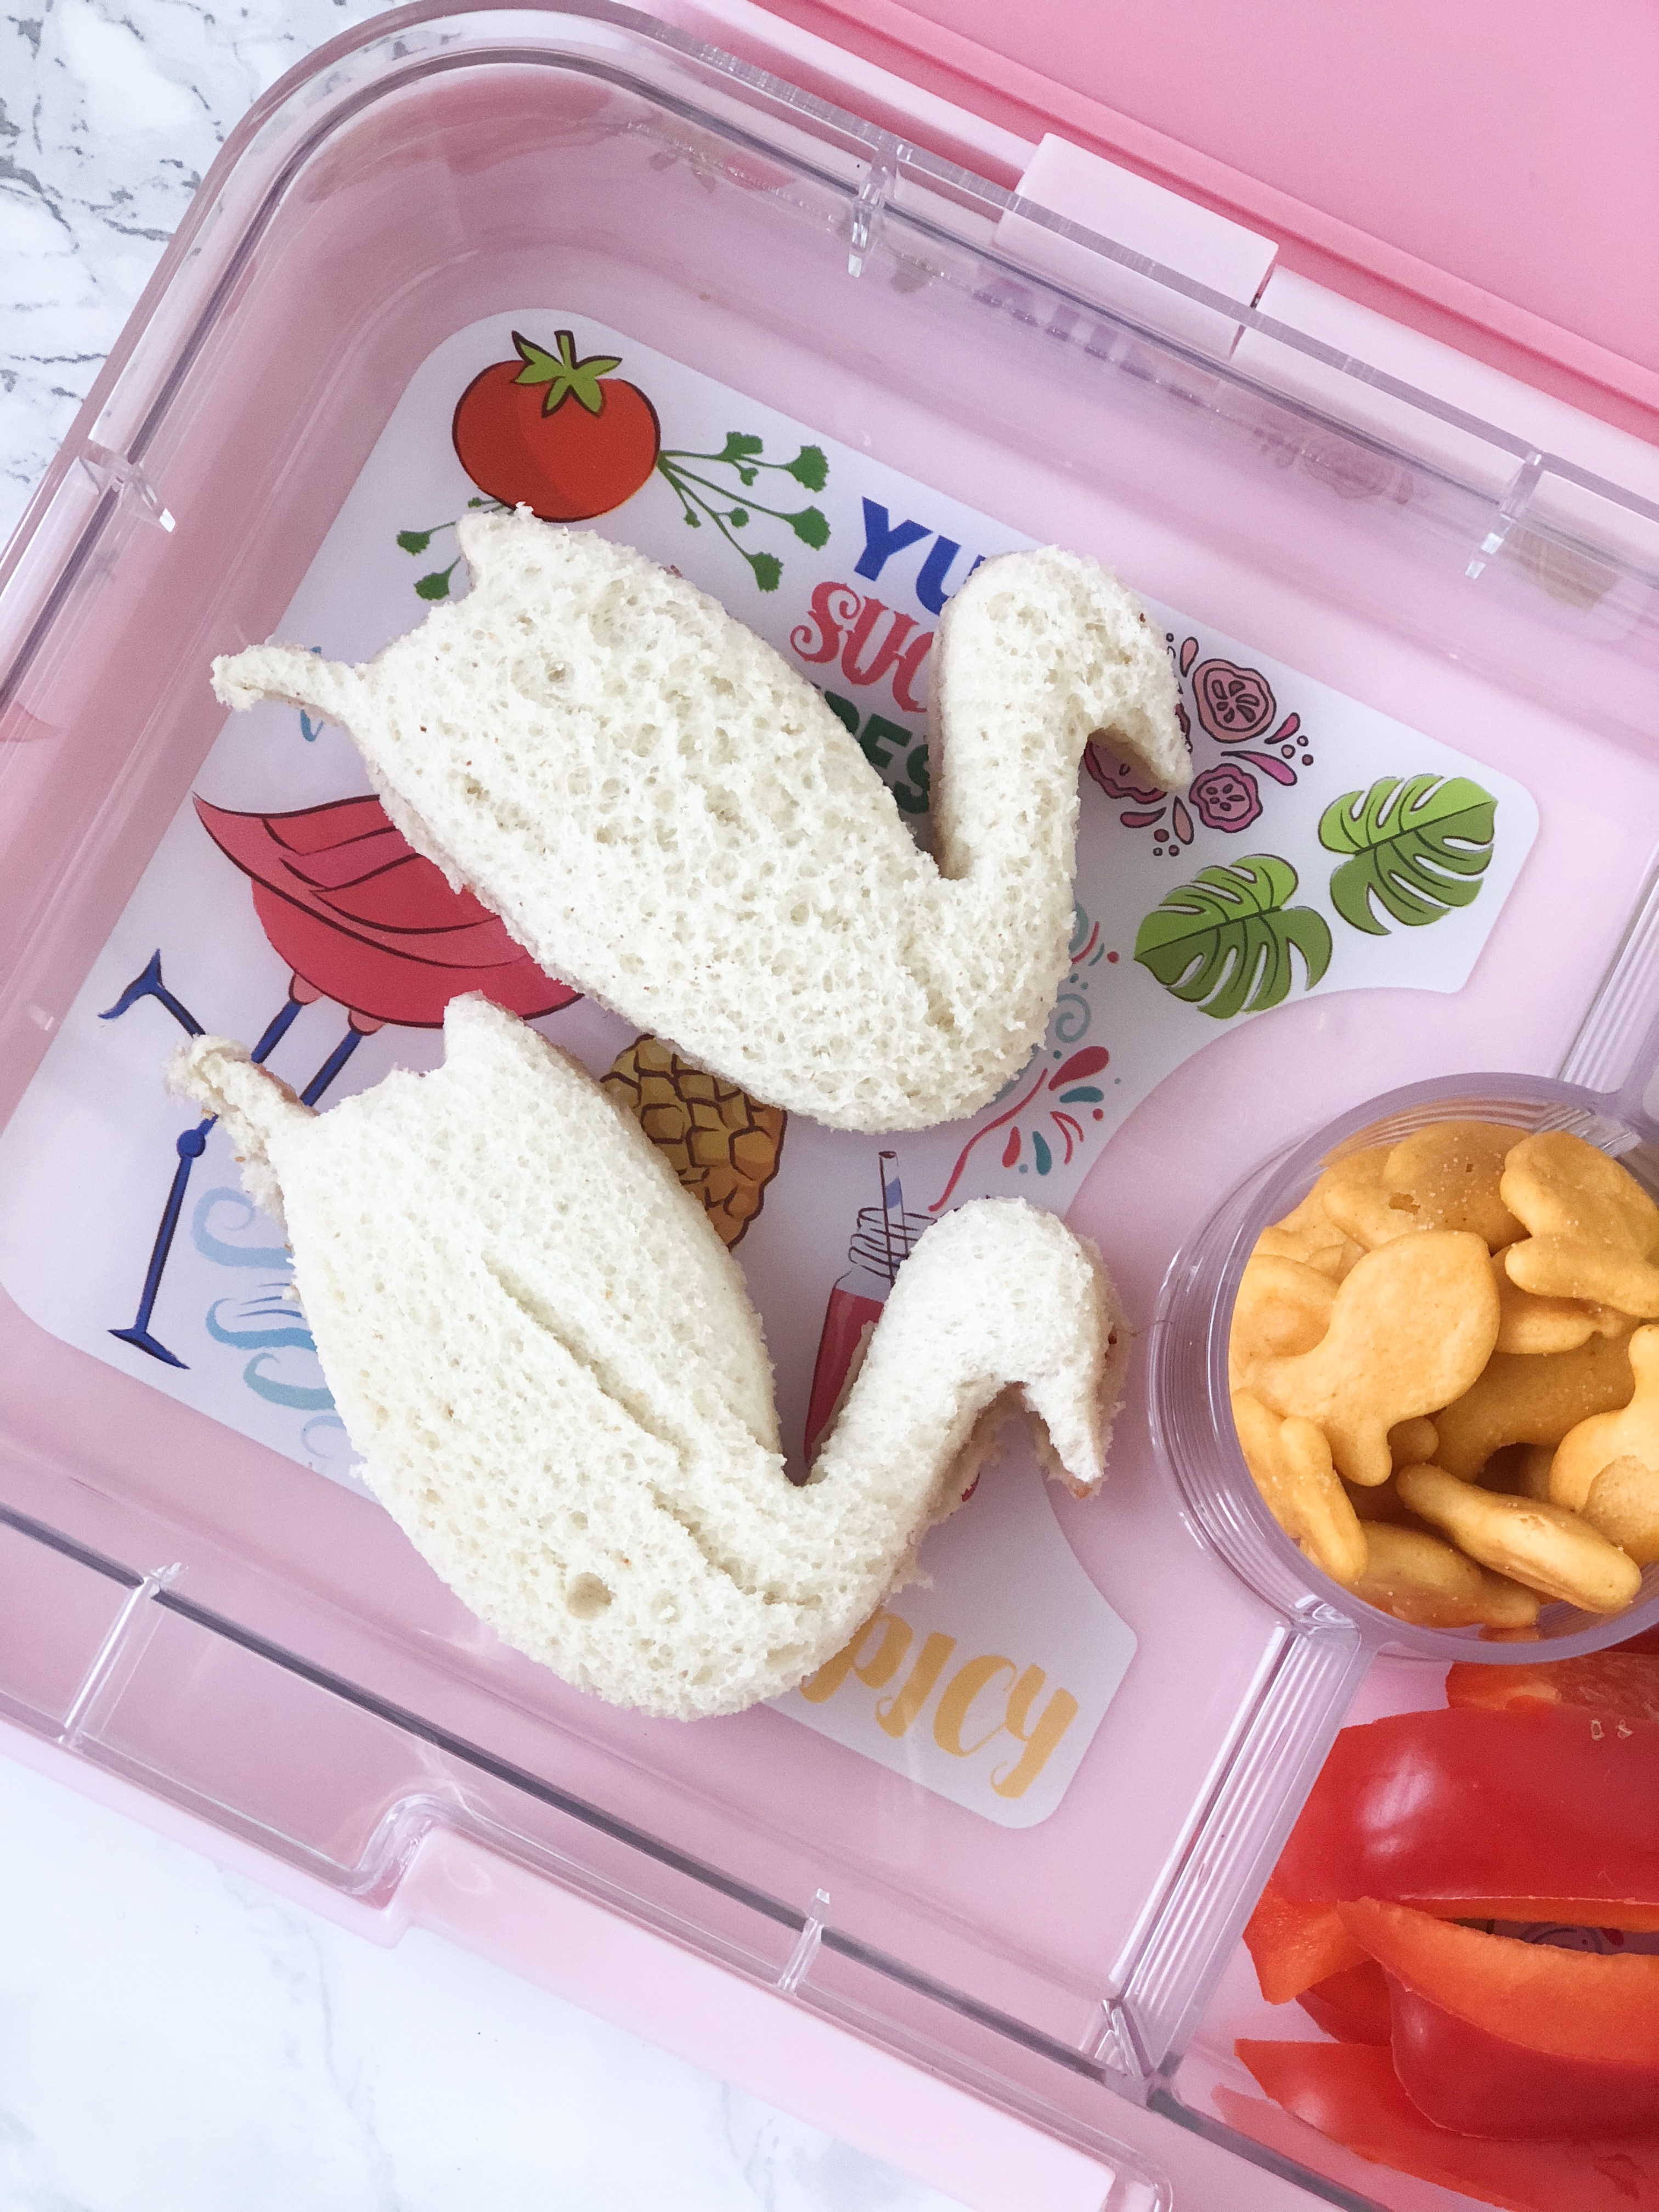 Back to school lunches on livin' life with style